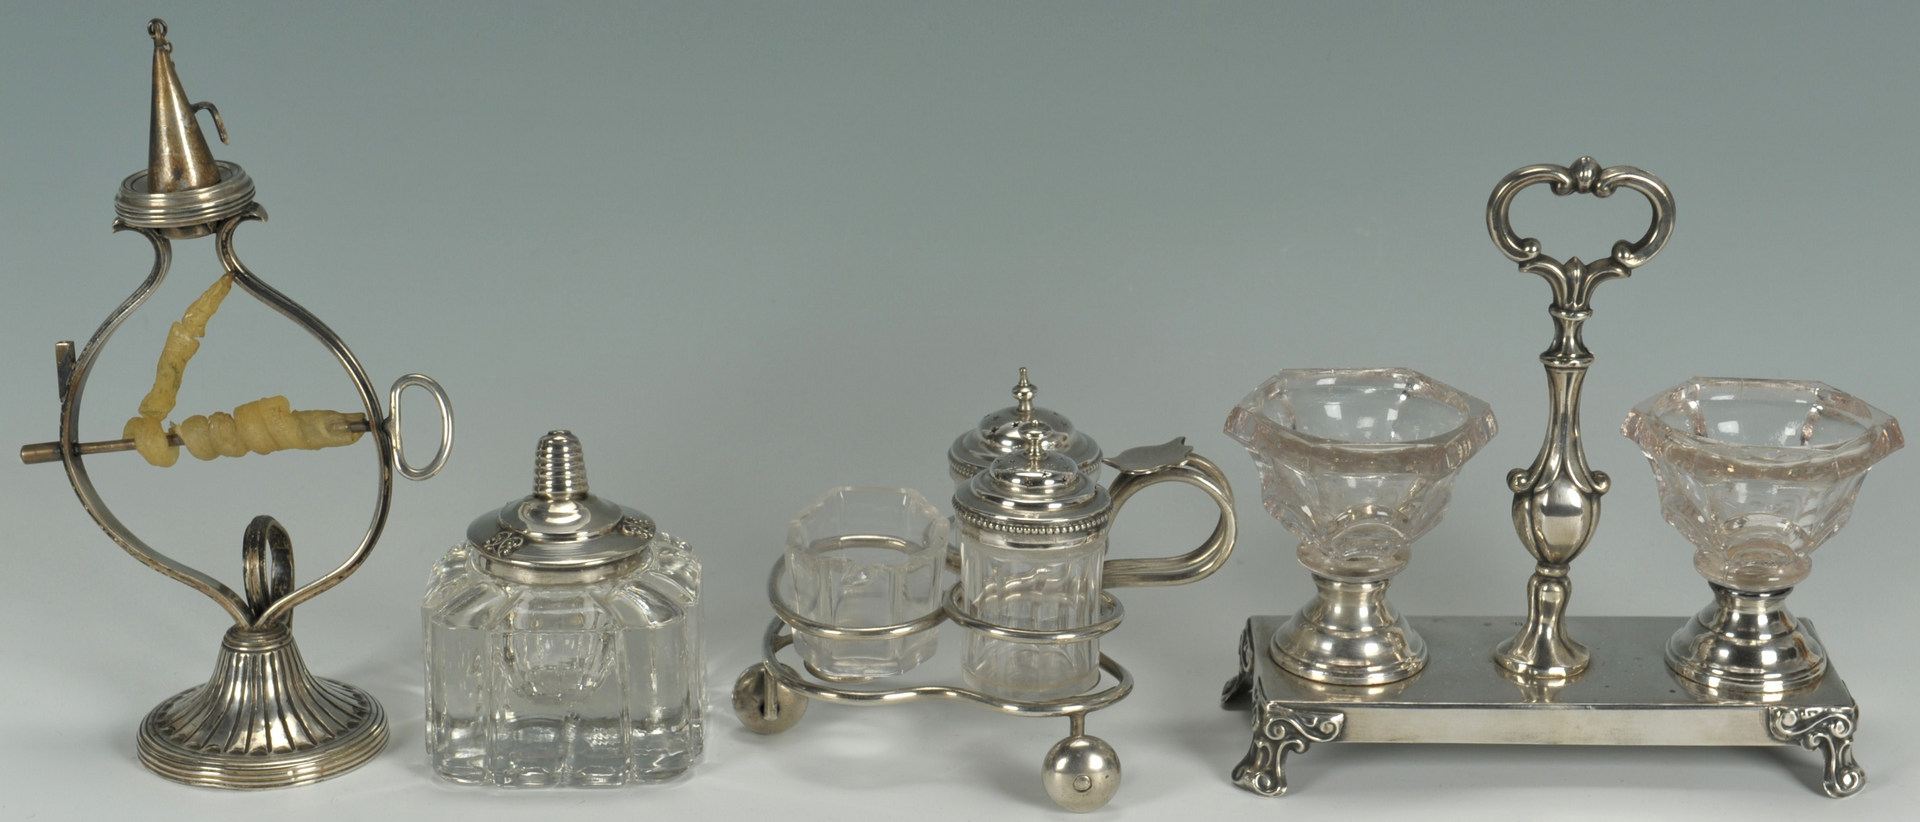 Lot 631: Asst'd silverplate, mother of pearl table items